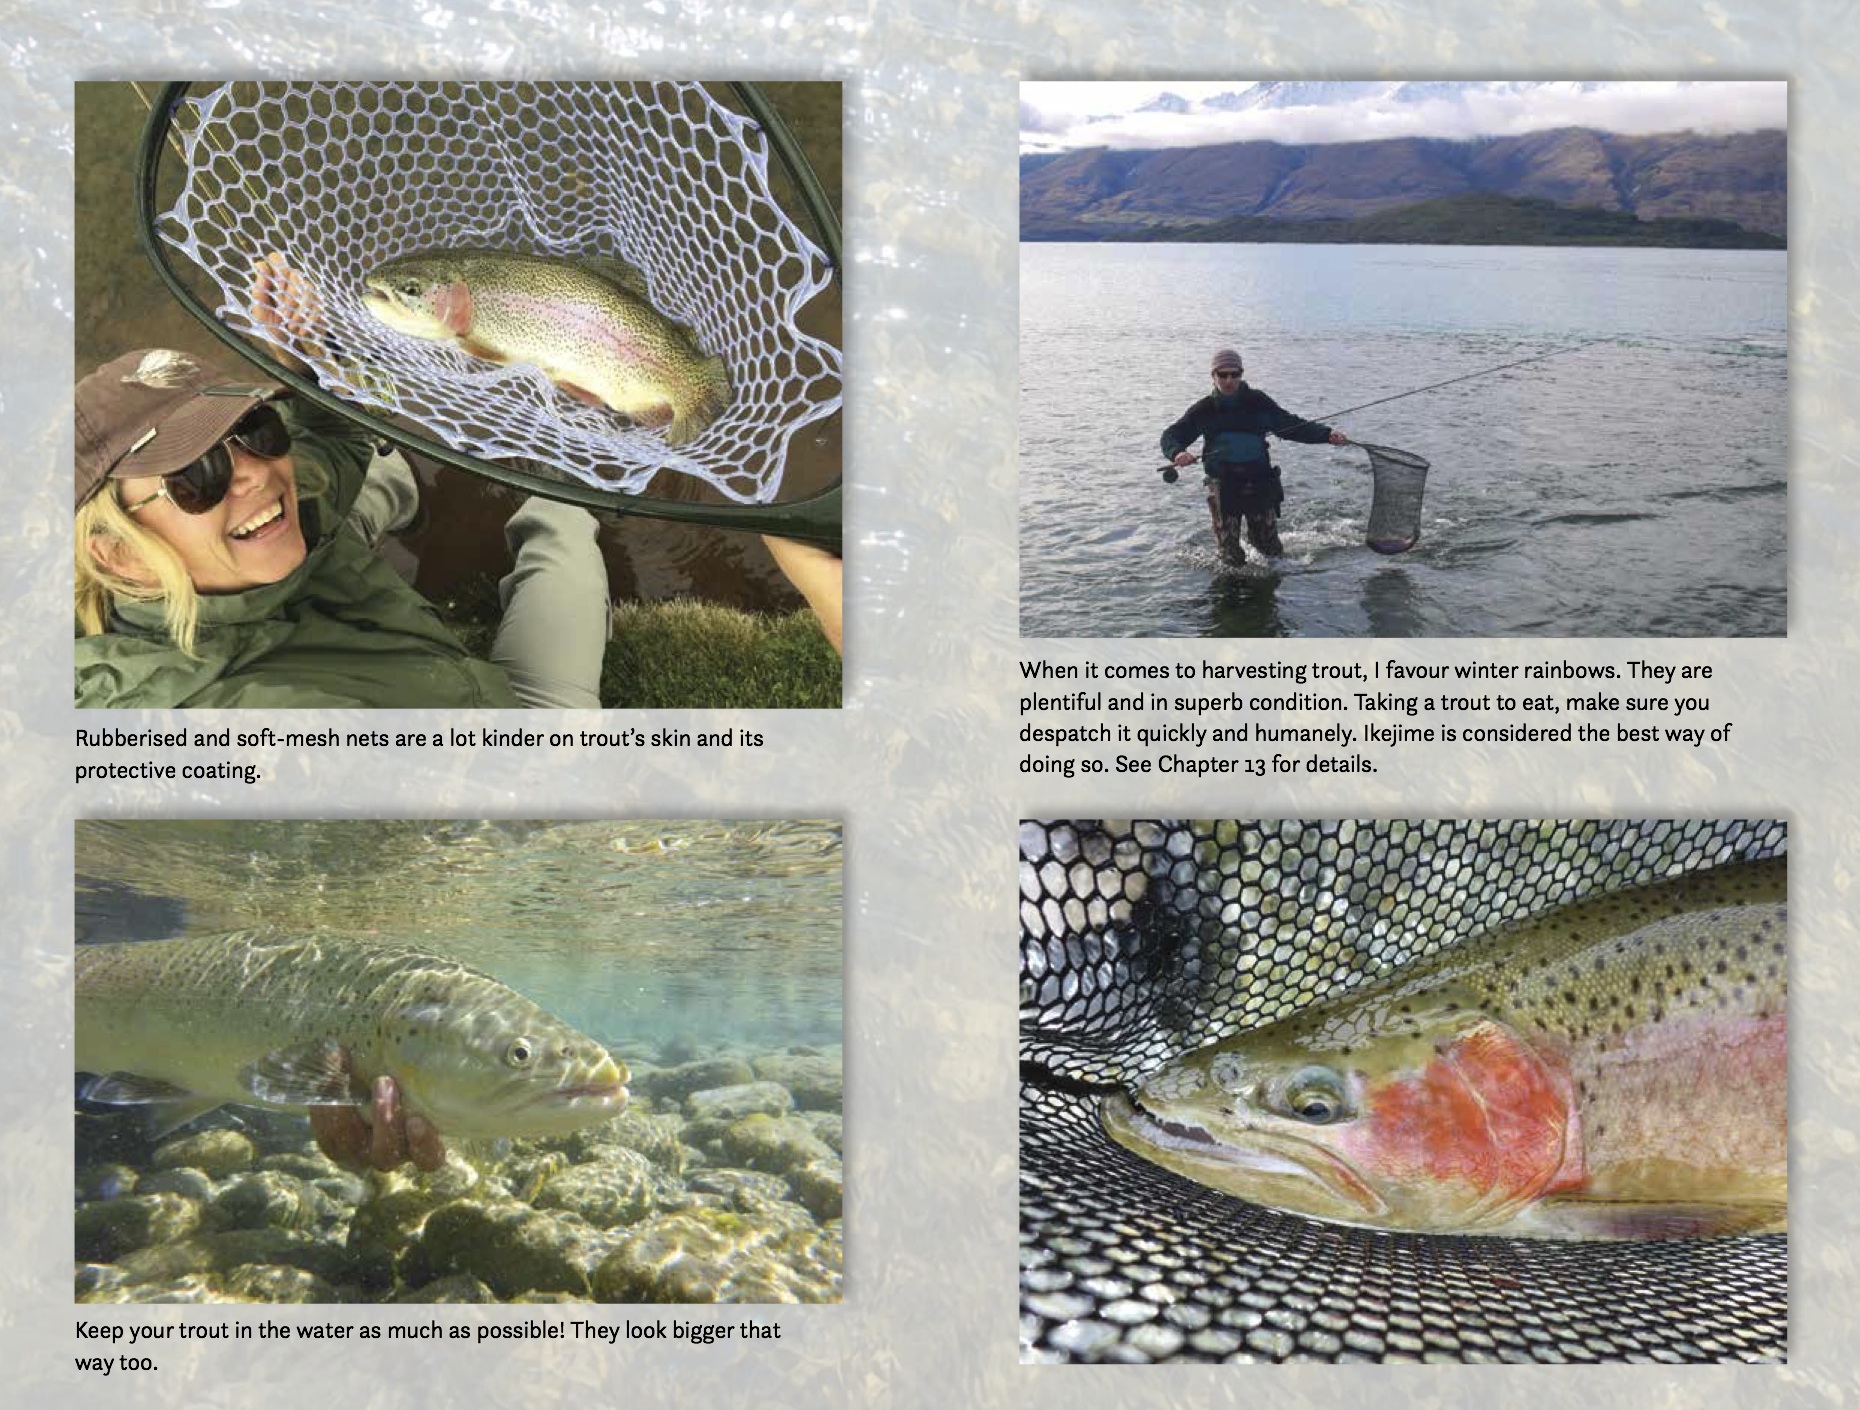 Fly fishing in Wanaka, Queenstown, Turangi, New Zealand, with Derek  Grzelewski, fishing guide and author of THE TROUT DIARIES and THE TROUT  BOHEMIA